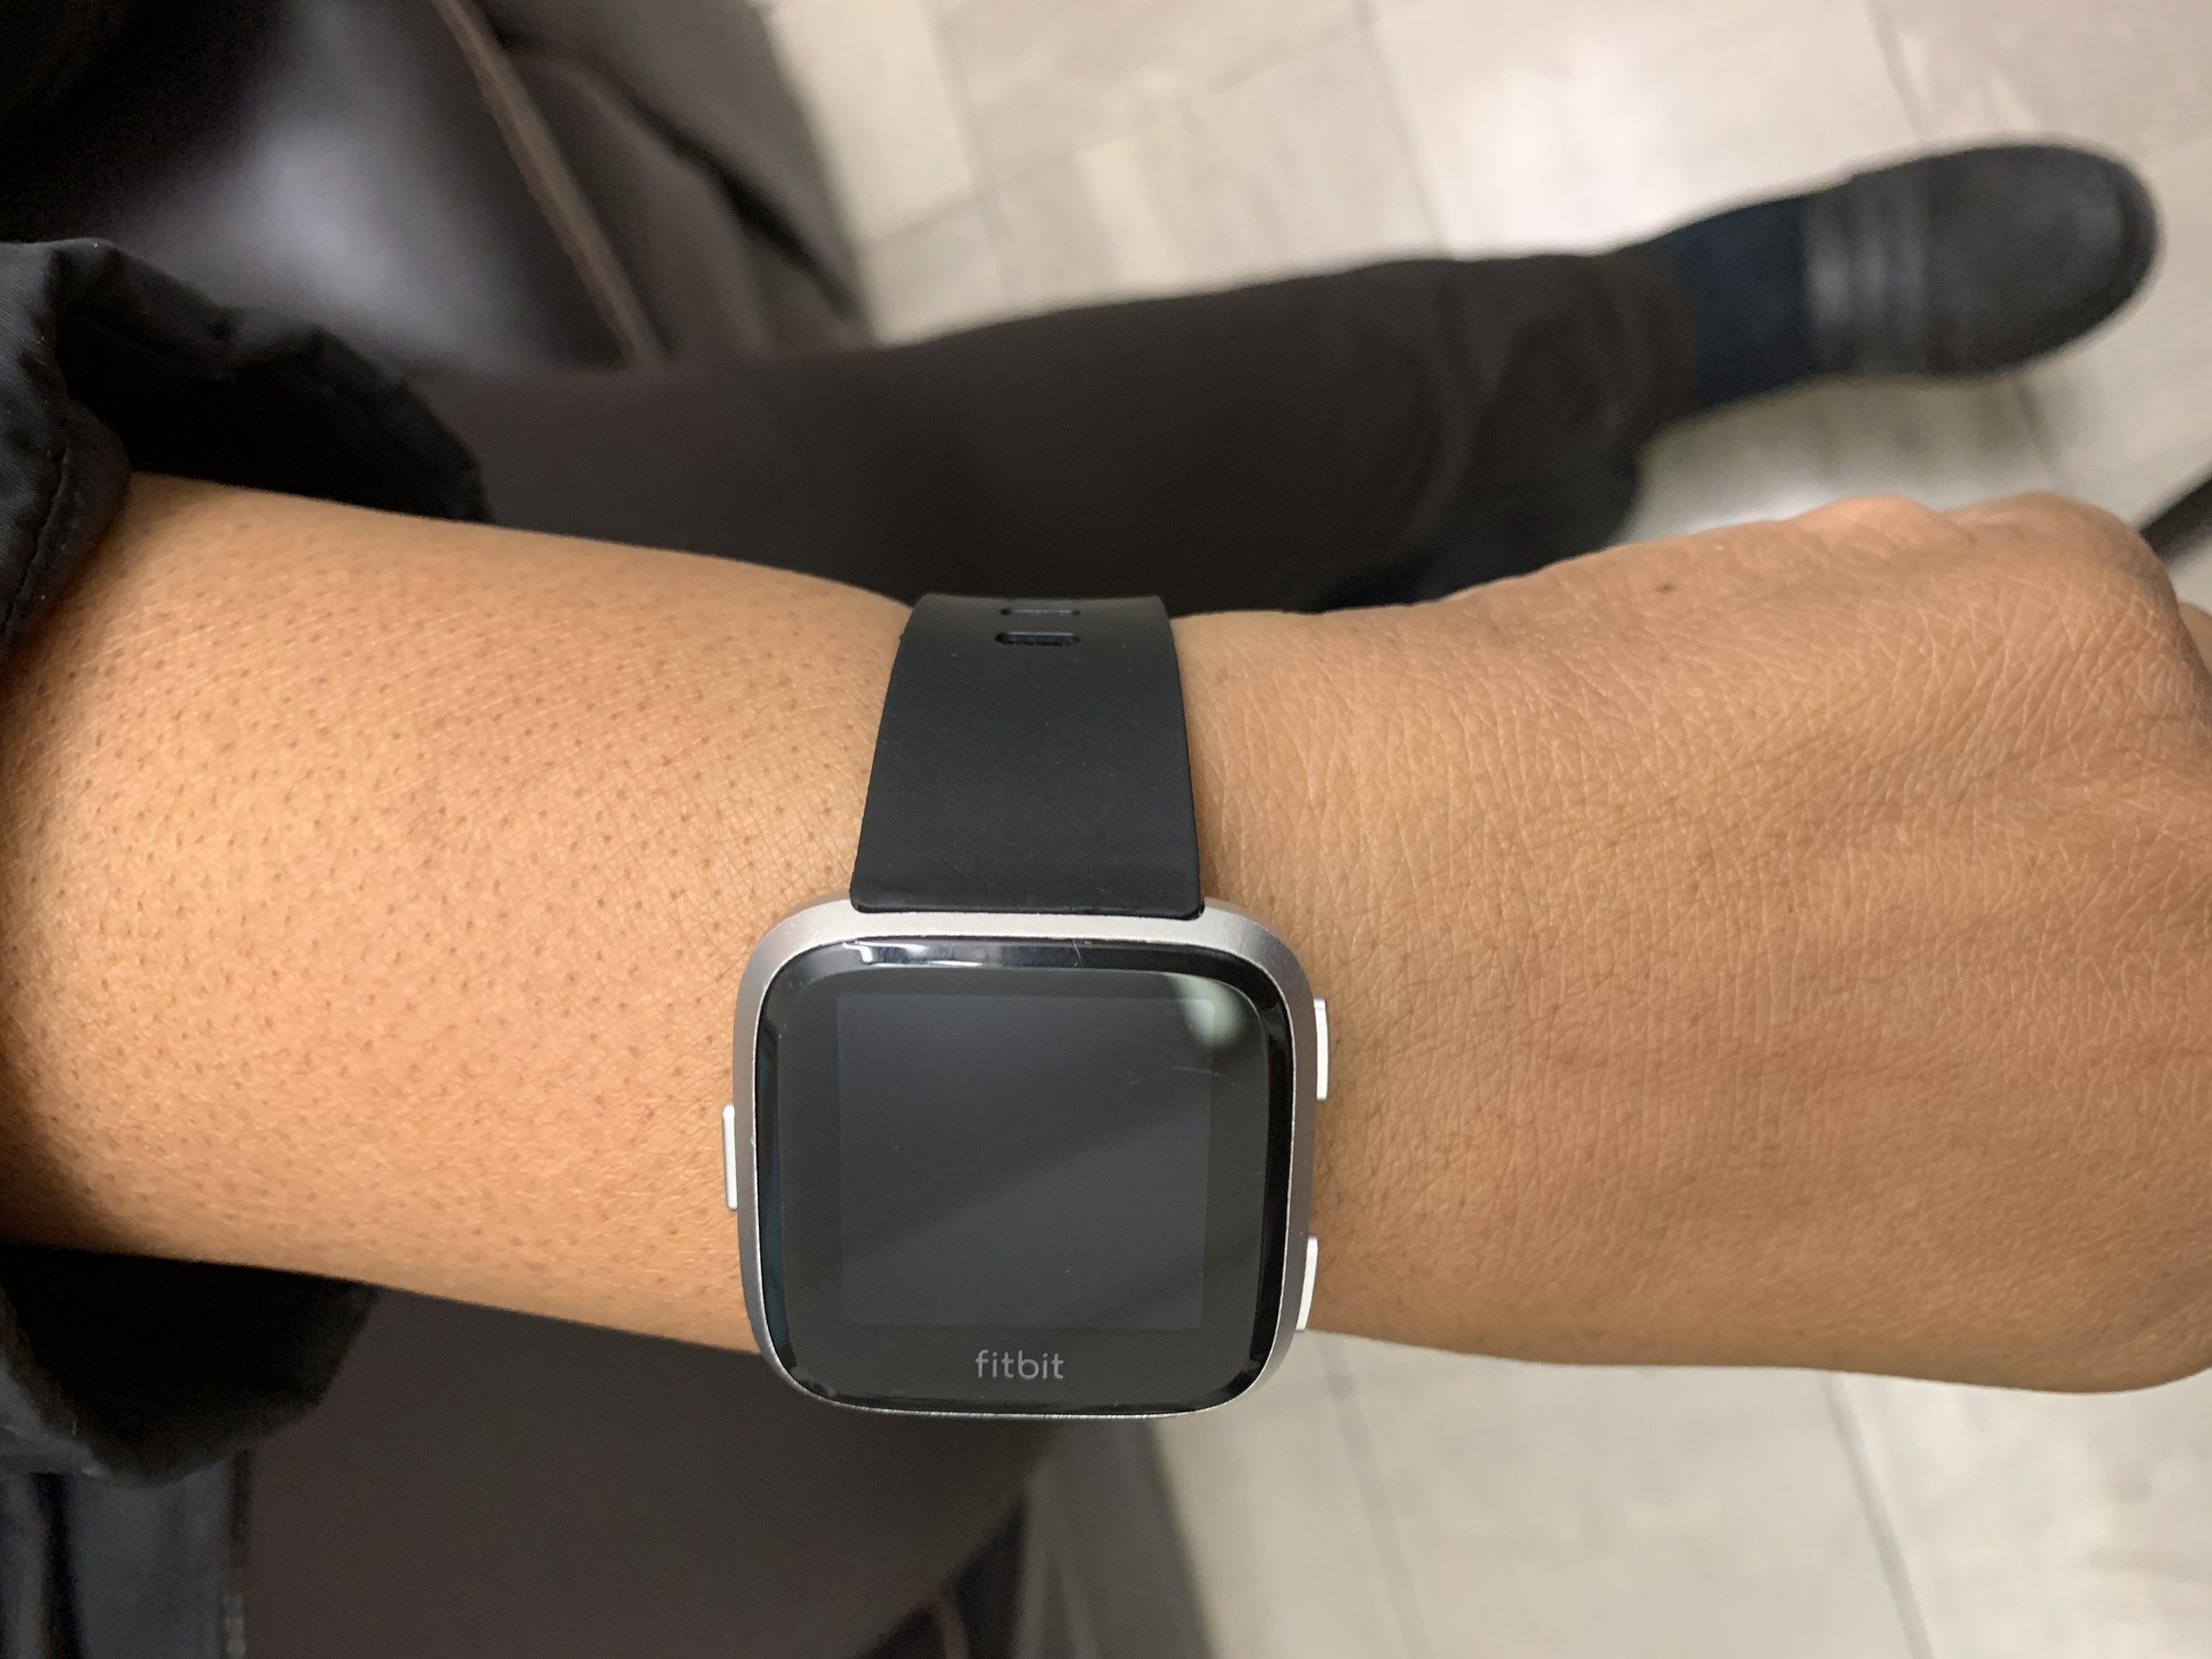 A picture of a smart watch